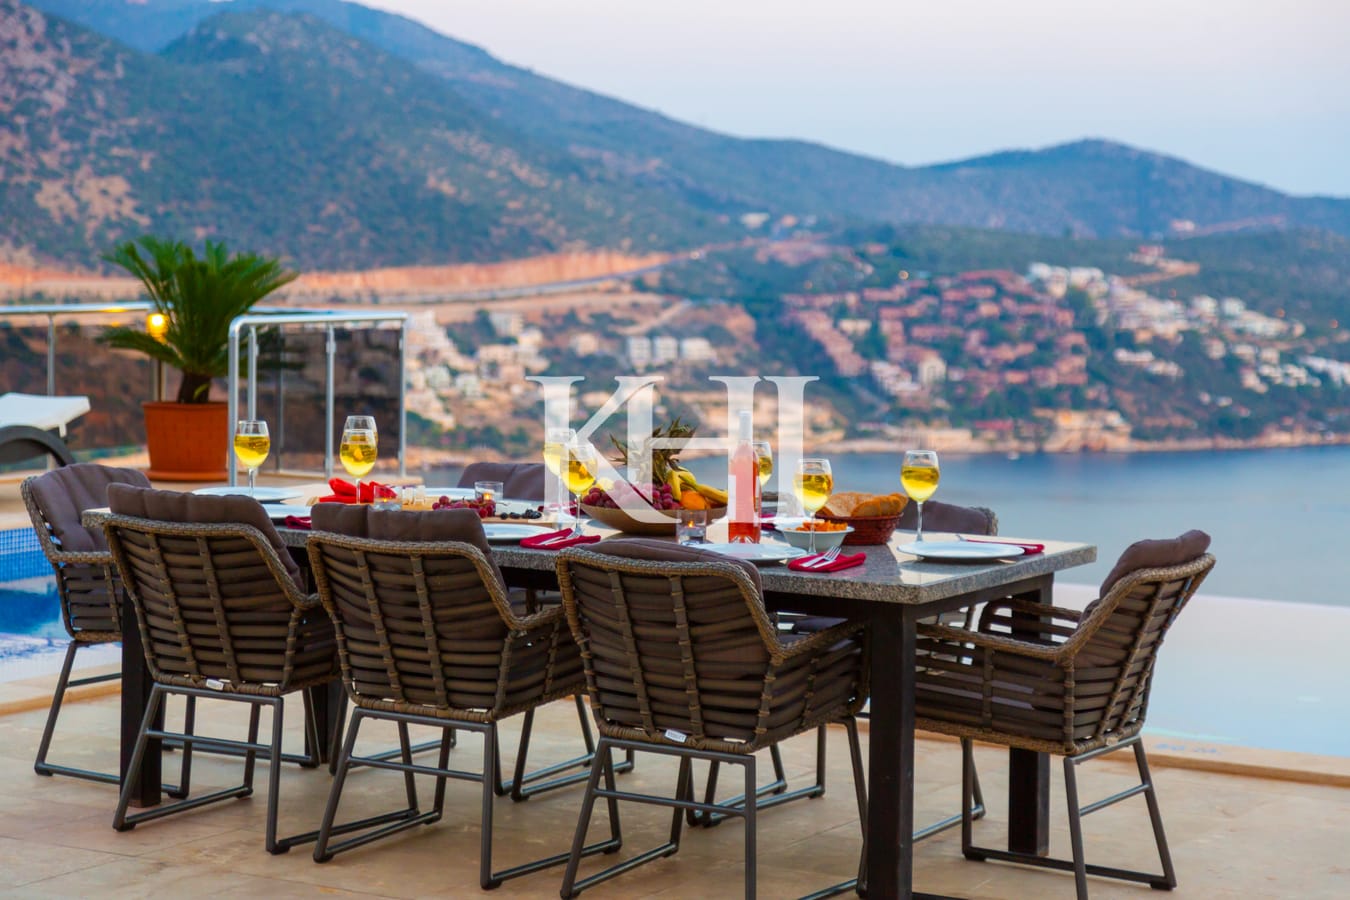 Detached Villa For Sale With Panoramic Kalkan View Slide Image 1